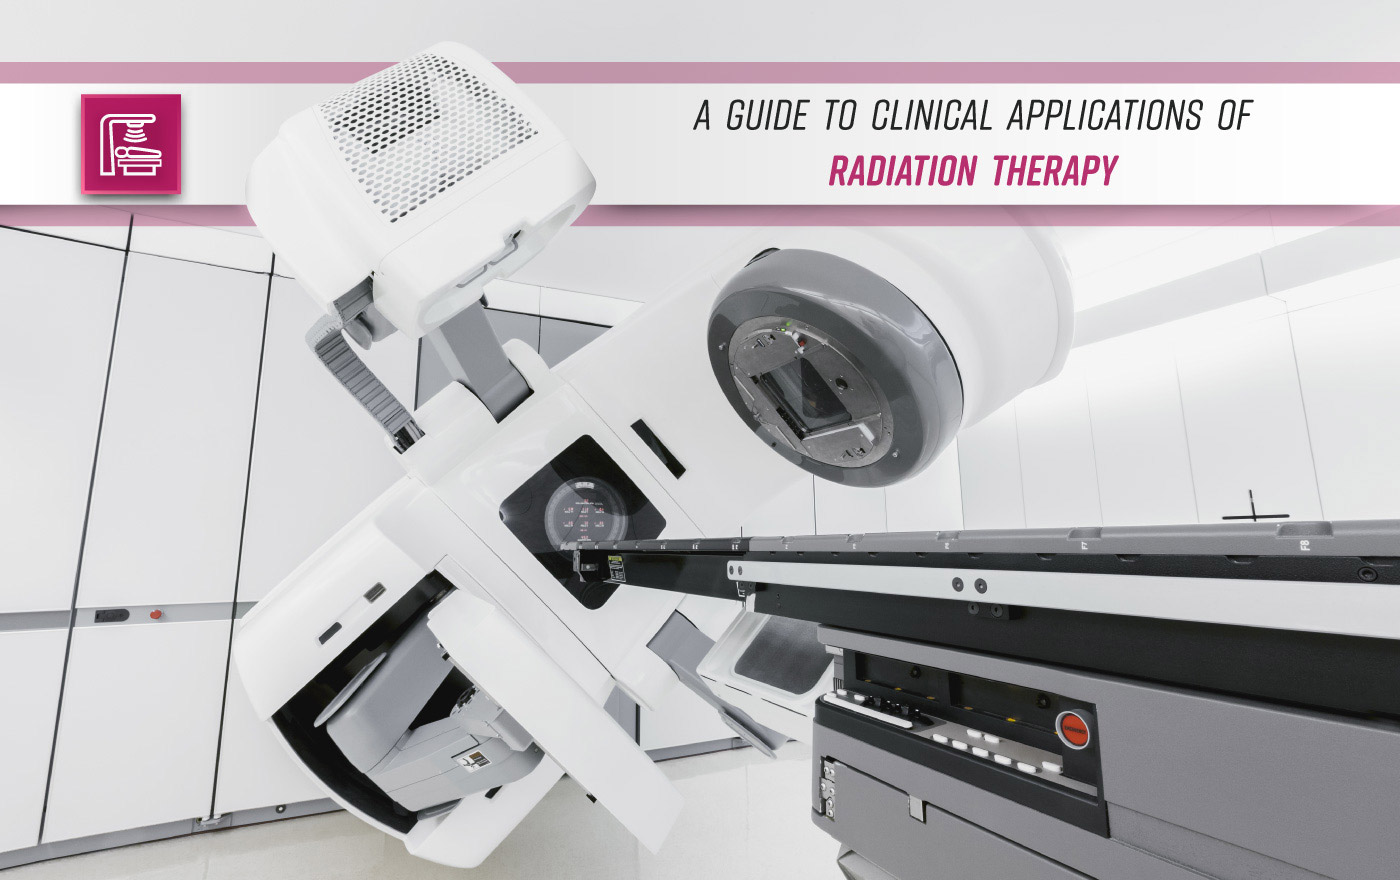 adiation Therapy Uses: A Guide to Clinical Applications of Radiation Therapy